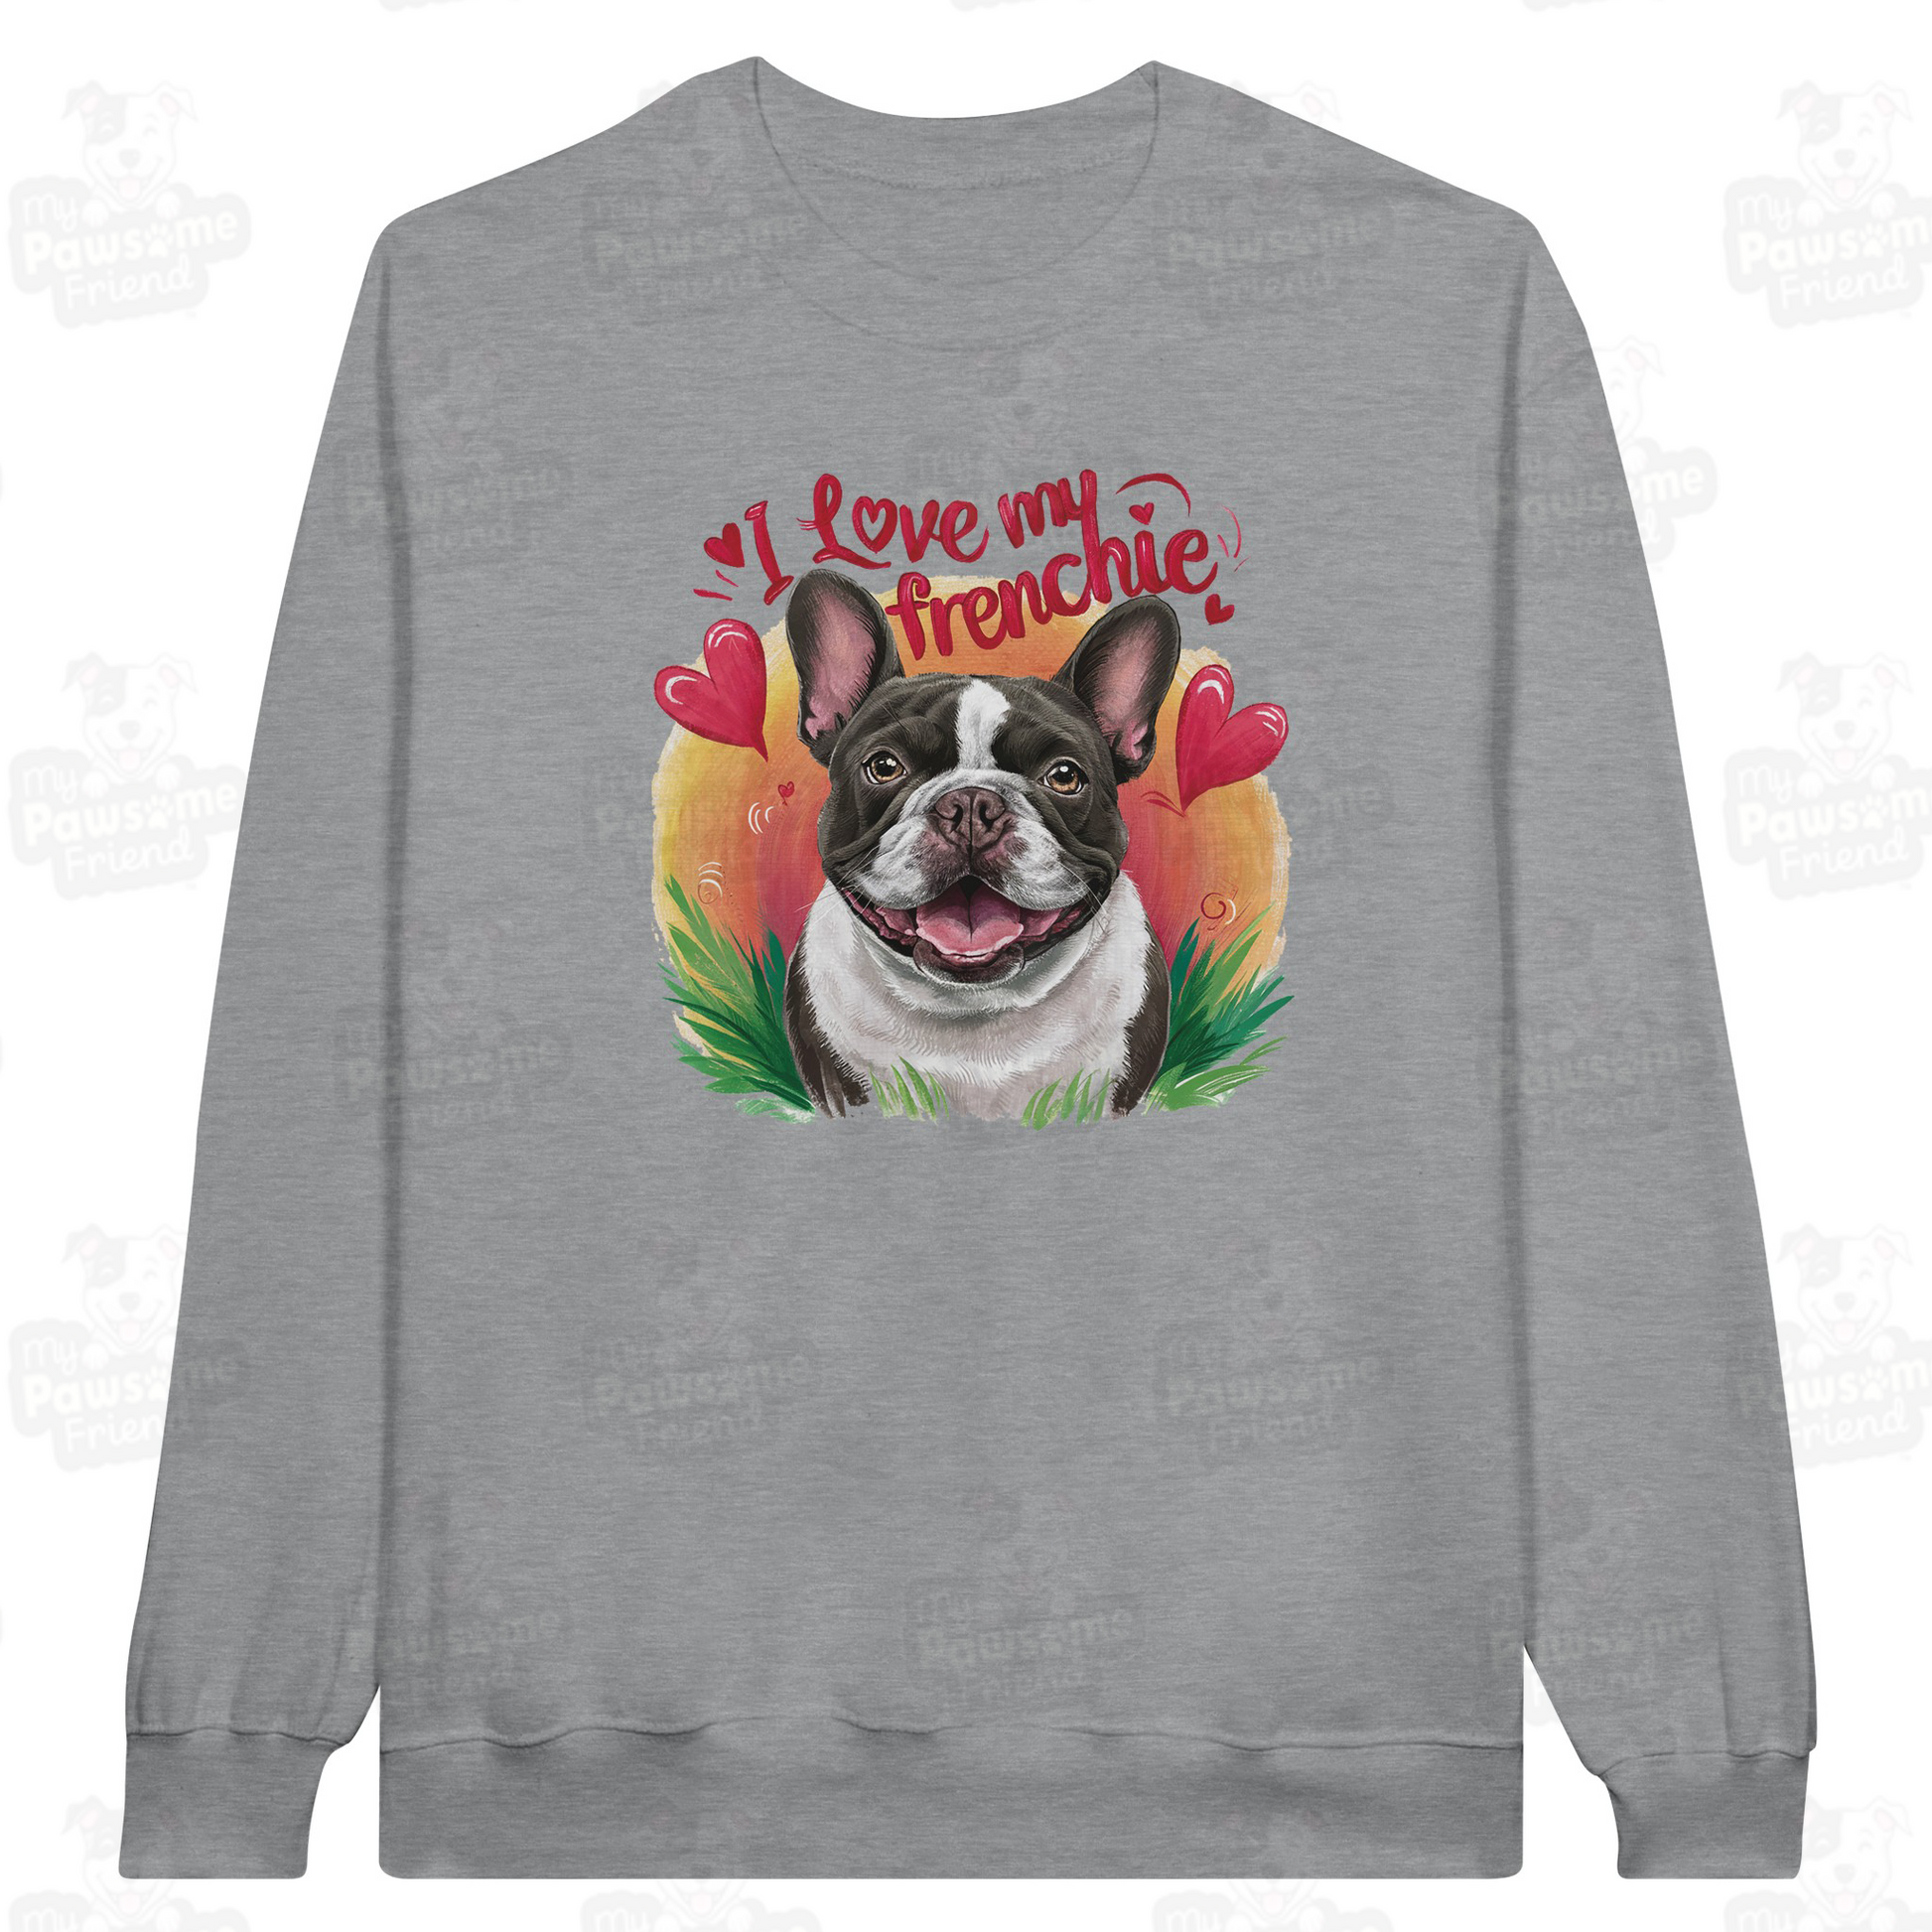 An unisex sweatshirt with a cute design featuring a french bulldog smiling surrounded by heart designs, and the phrase "I love my Frenchie". The color of the unisex sweatshirt is grey